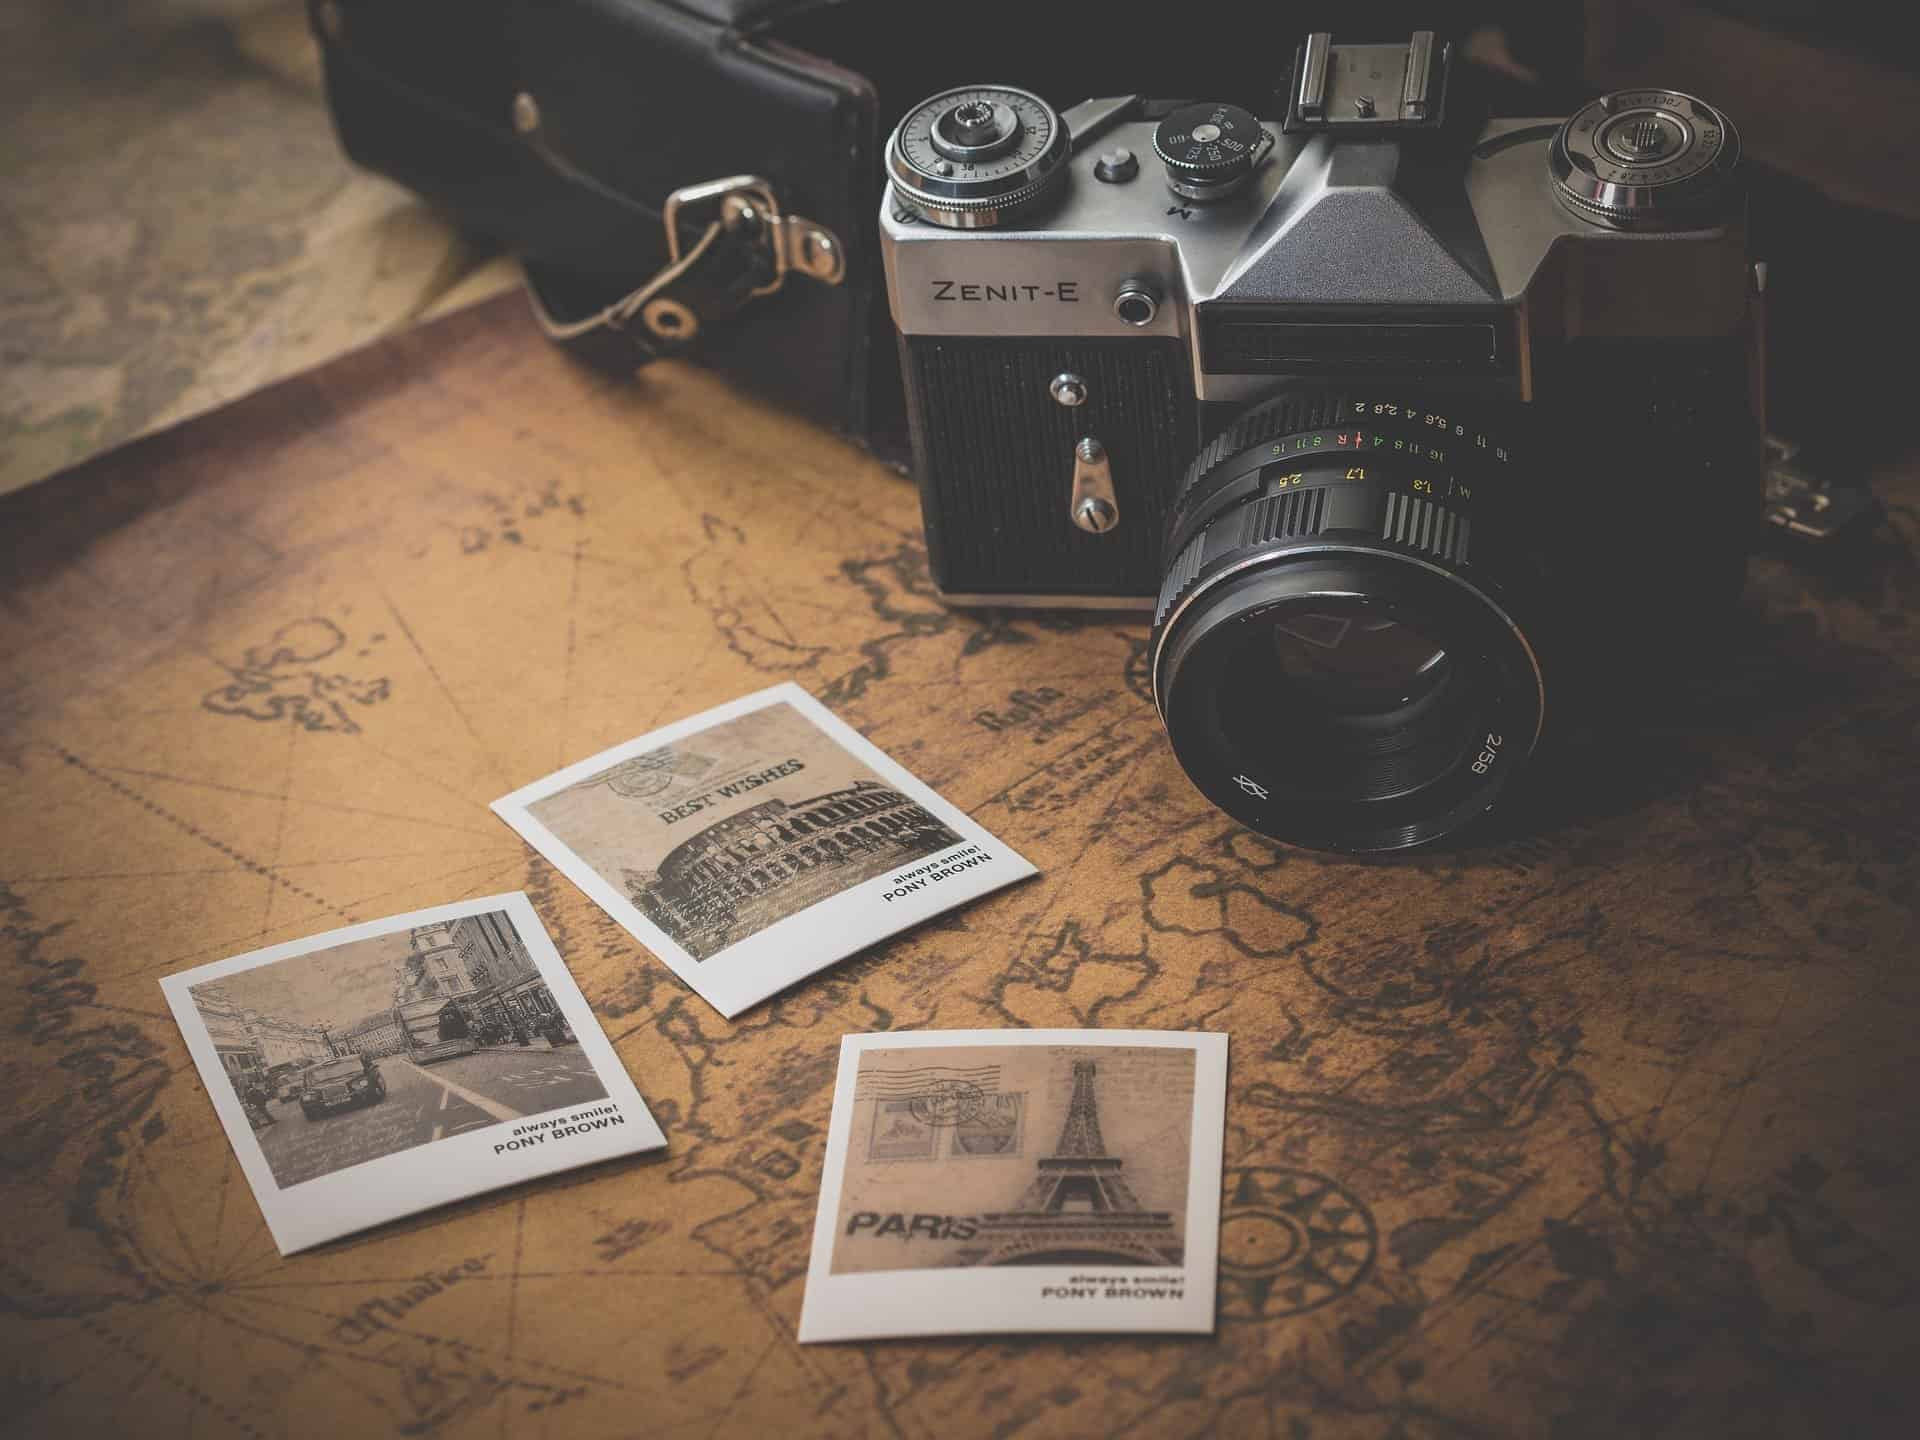 Vintage aesthetic camera and polaroid photos showing that brand design helps to create a connection between businesses and their audience.